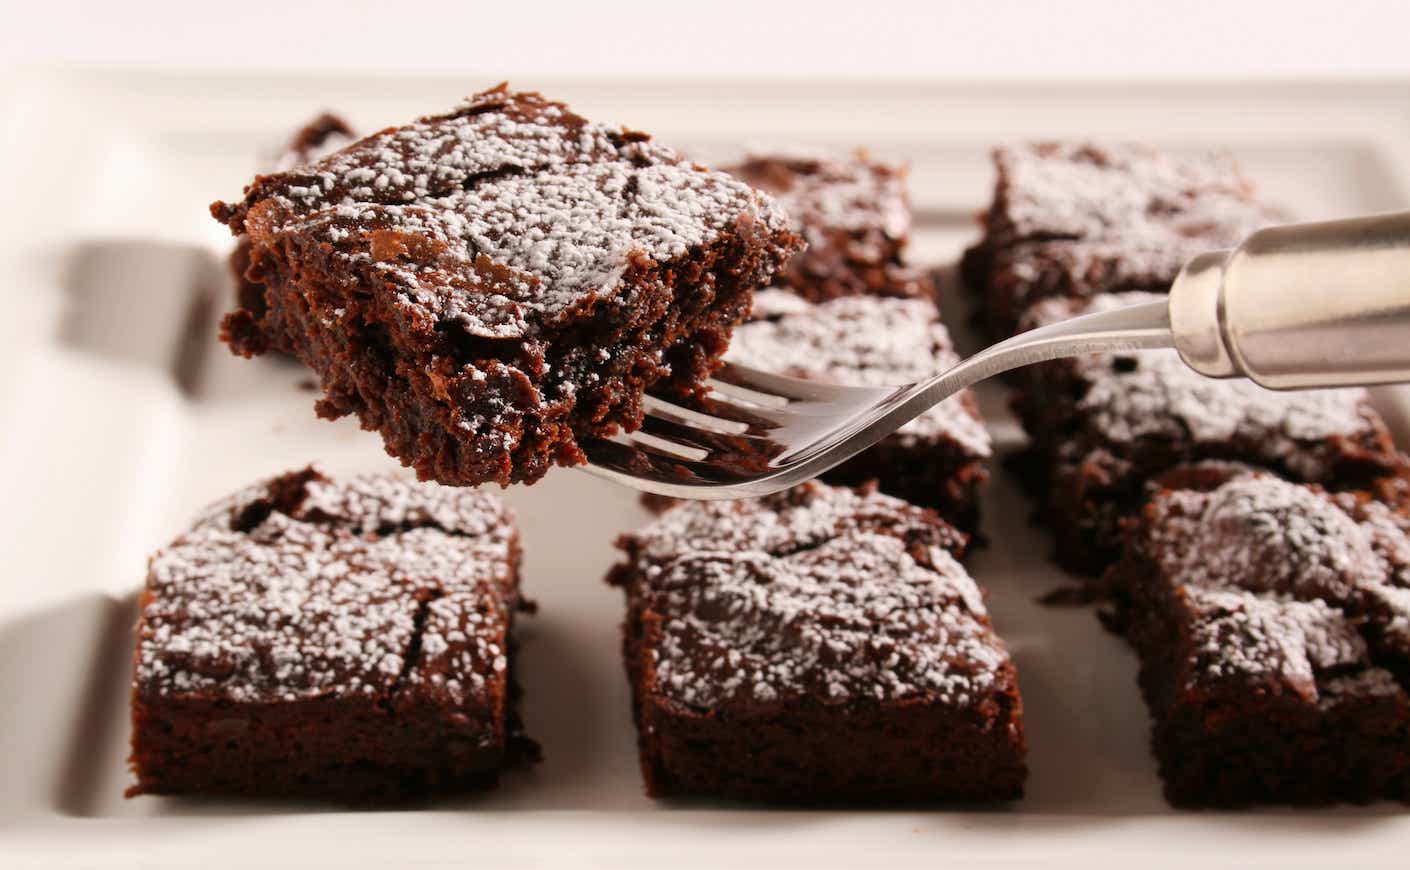 Homemade Chocolate Fudge Brownies - Reluctant Entertainer